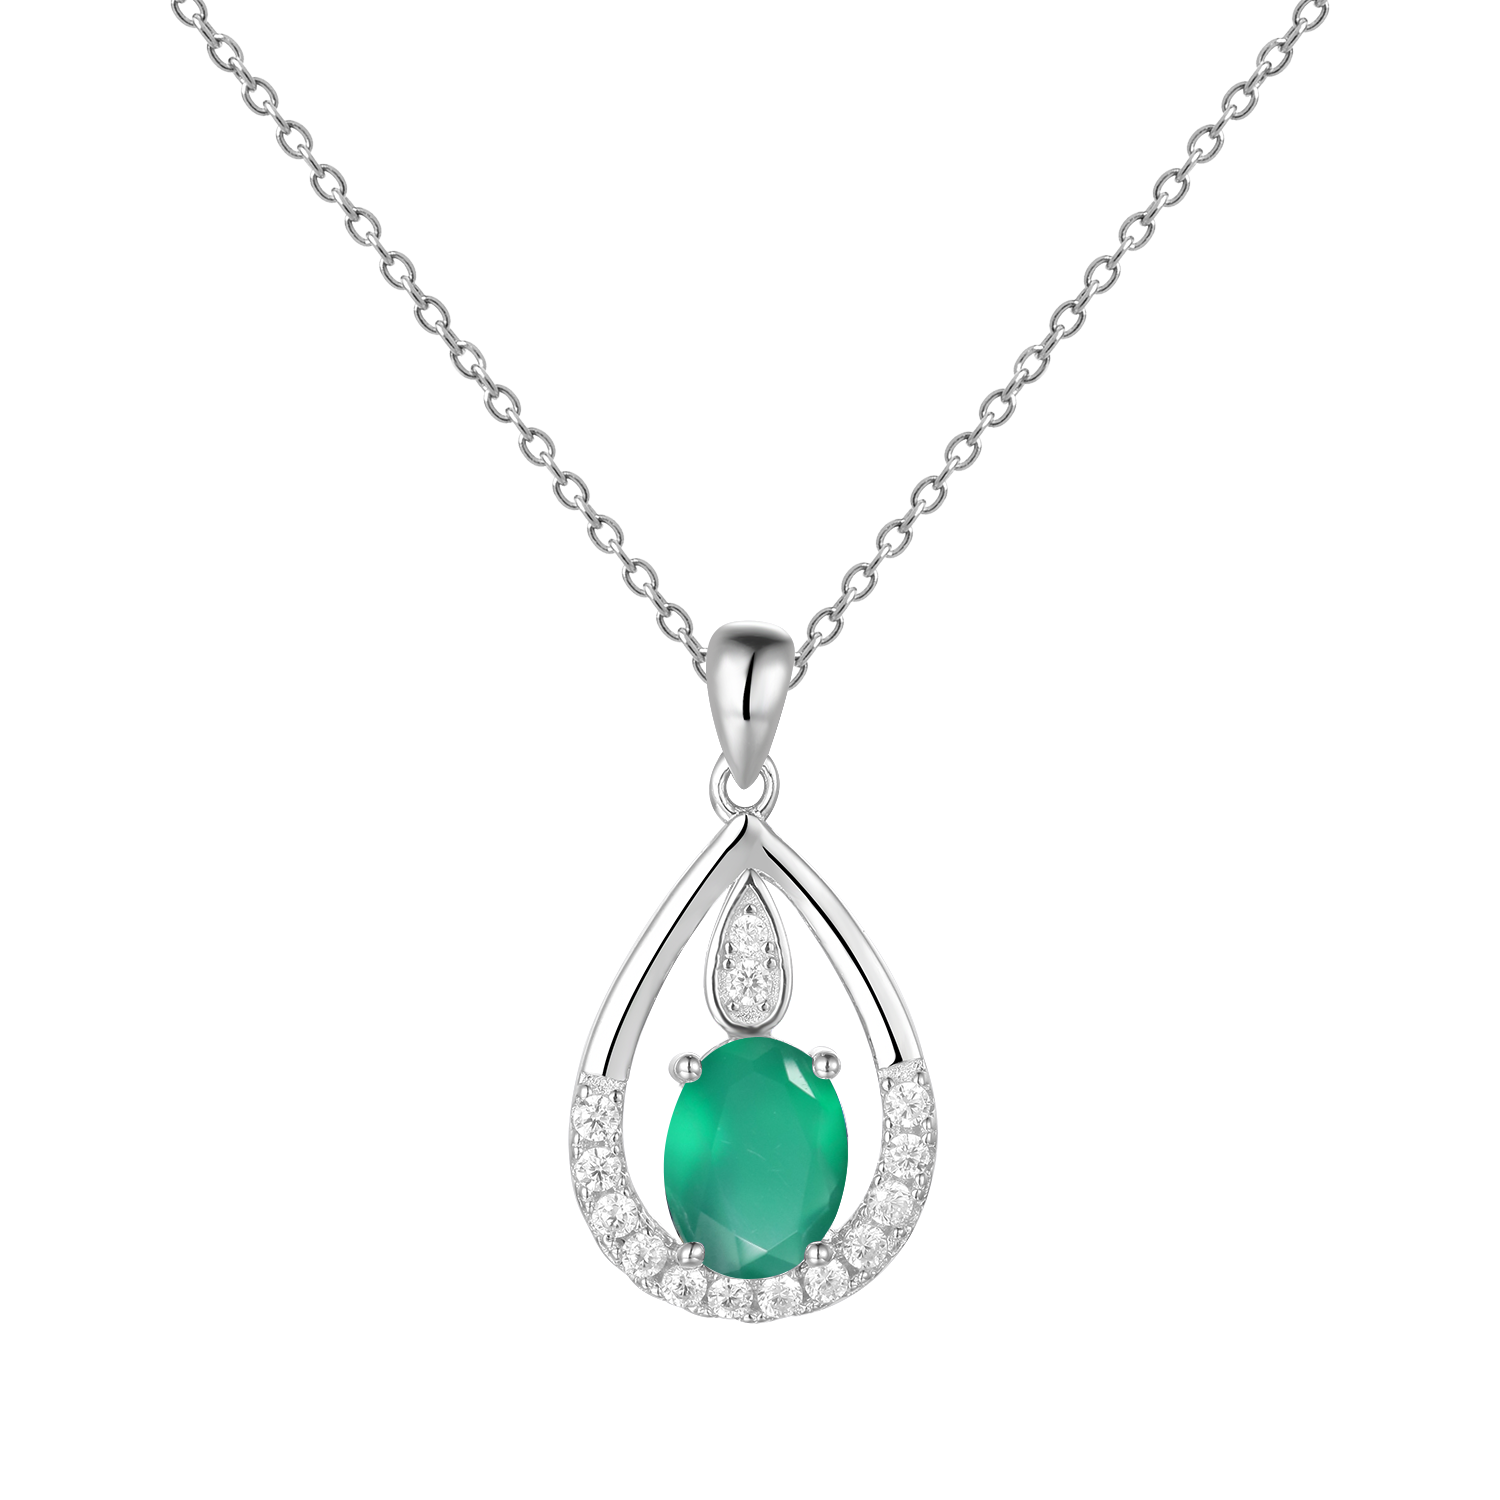 Gem&#39;s Ballet December Birthstone Topaz Necklace 6x8mm Oval Pink Topaz Pendant Necklace in 925 Sterling Silver with 18&quot; Chain Green Agate